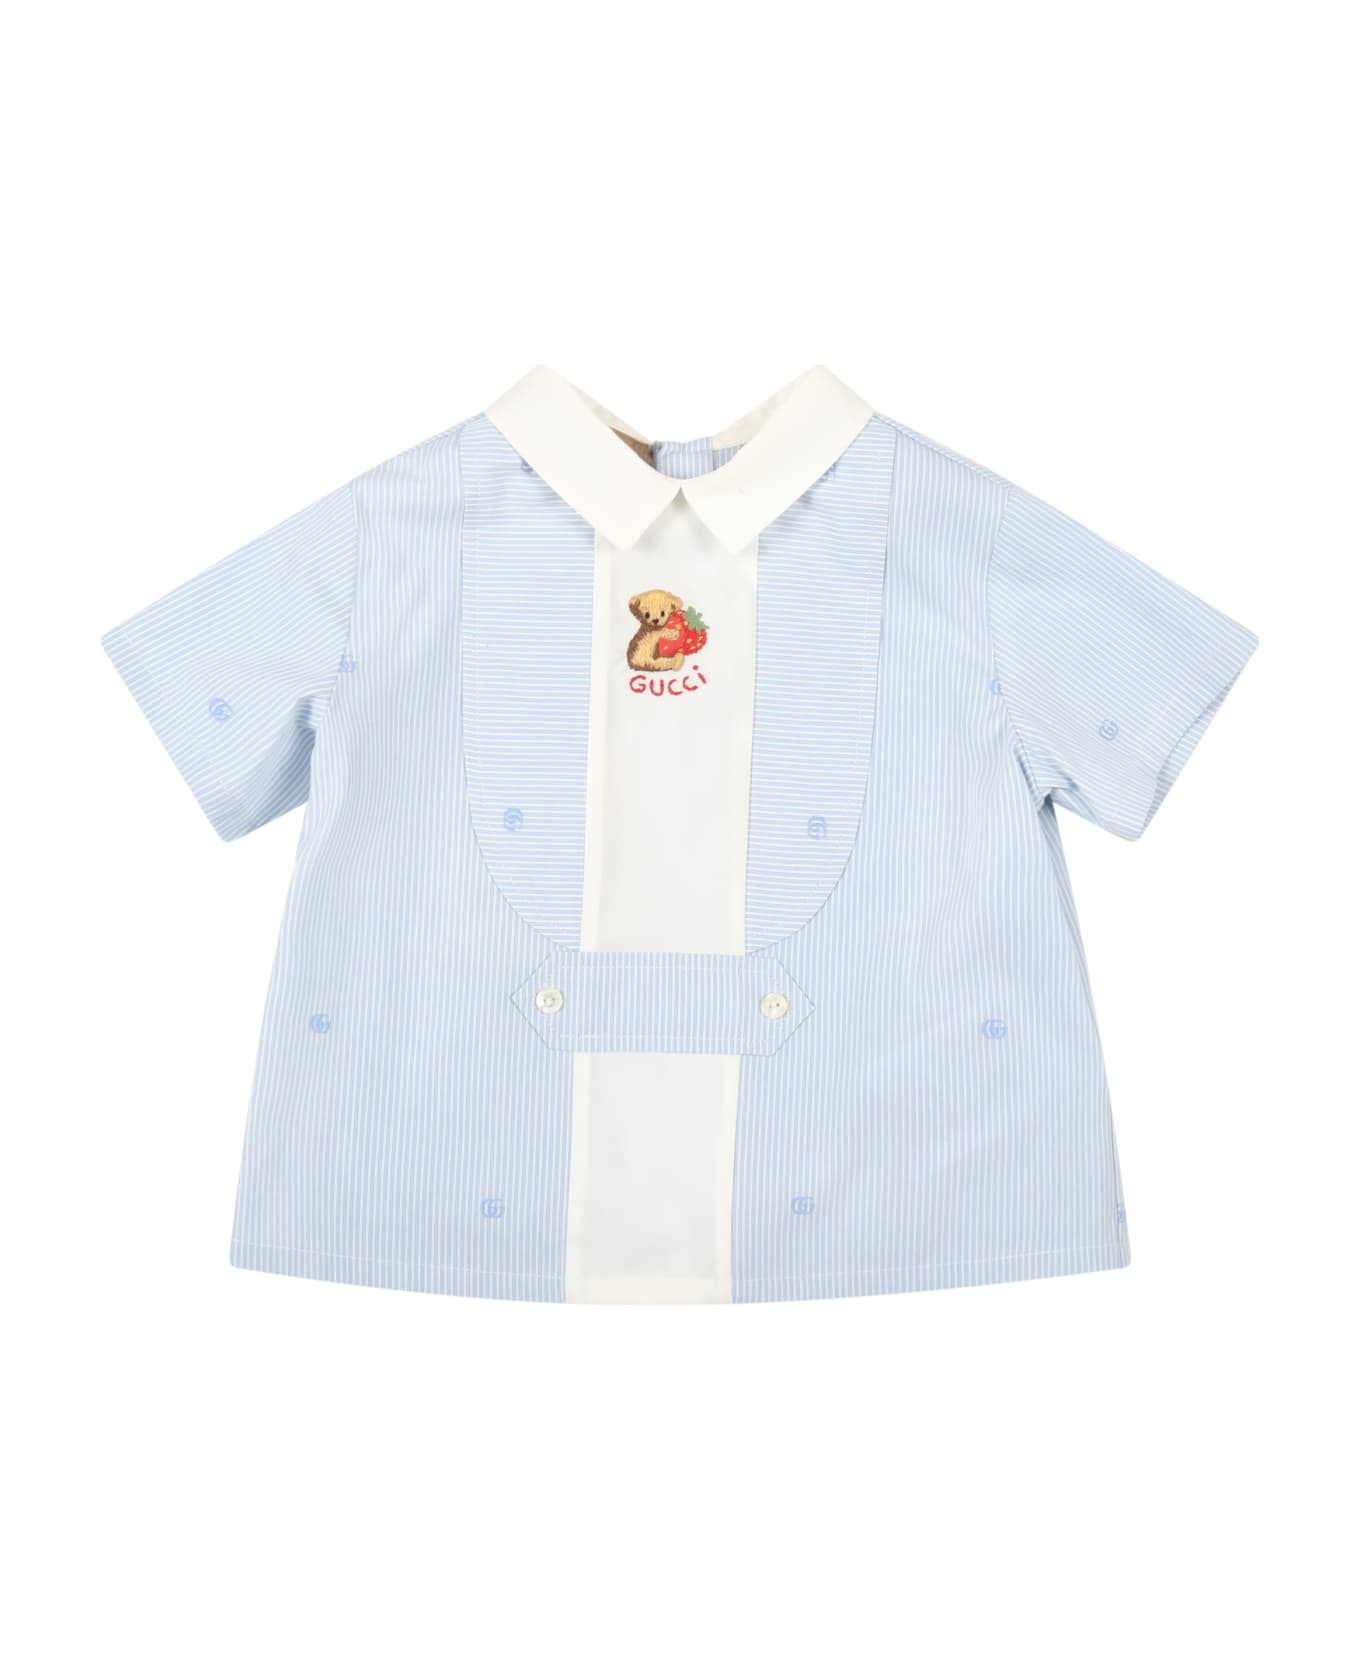 Gucci Multicolor Shirt For Baby Boy With Bear - Light Blue